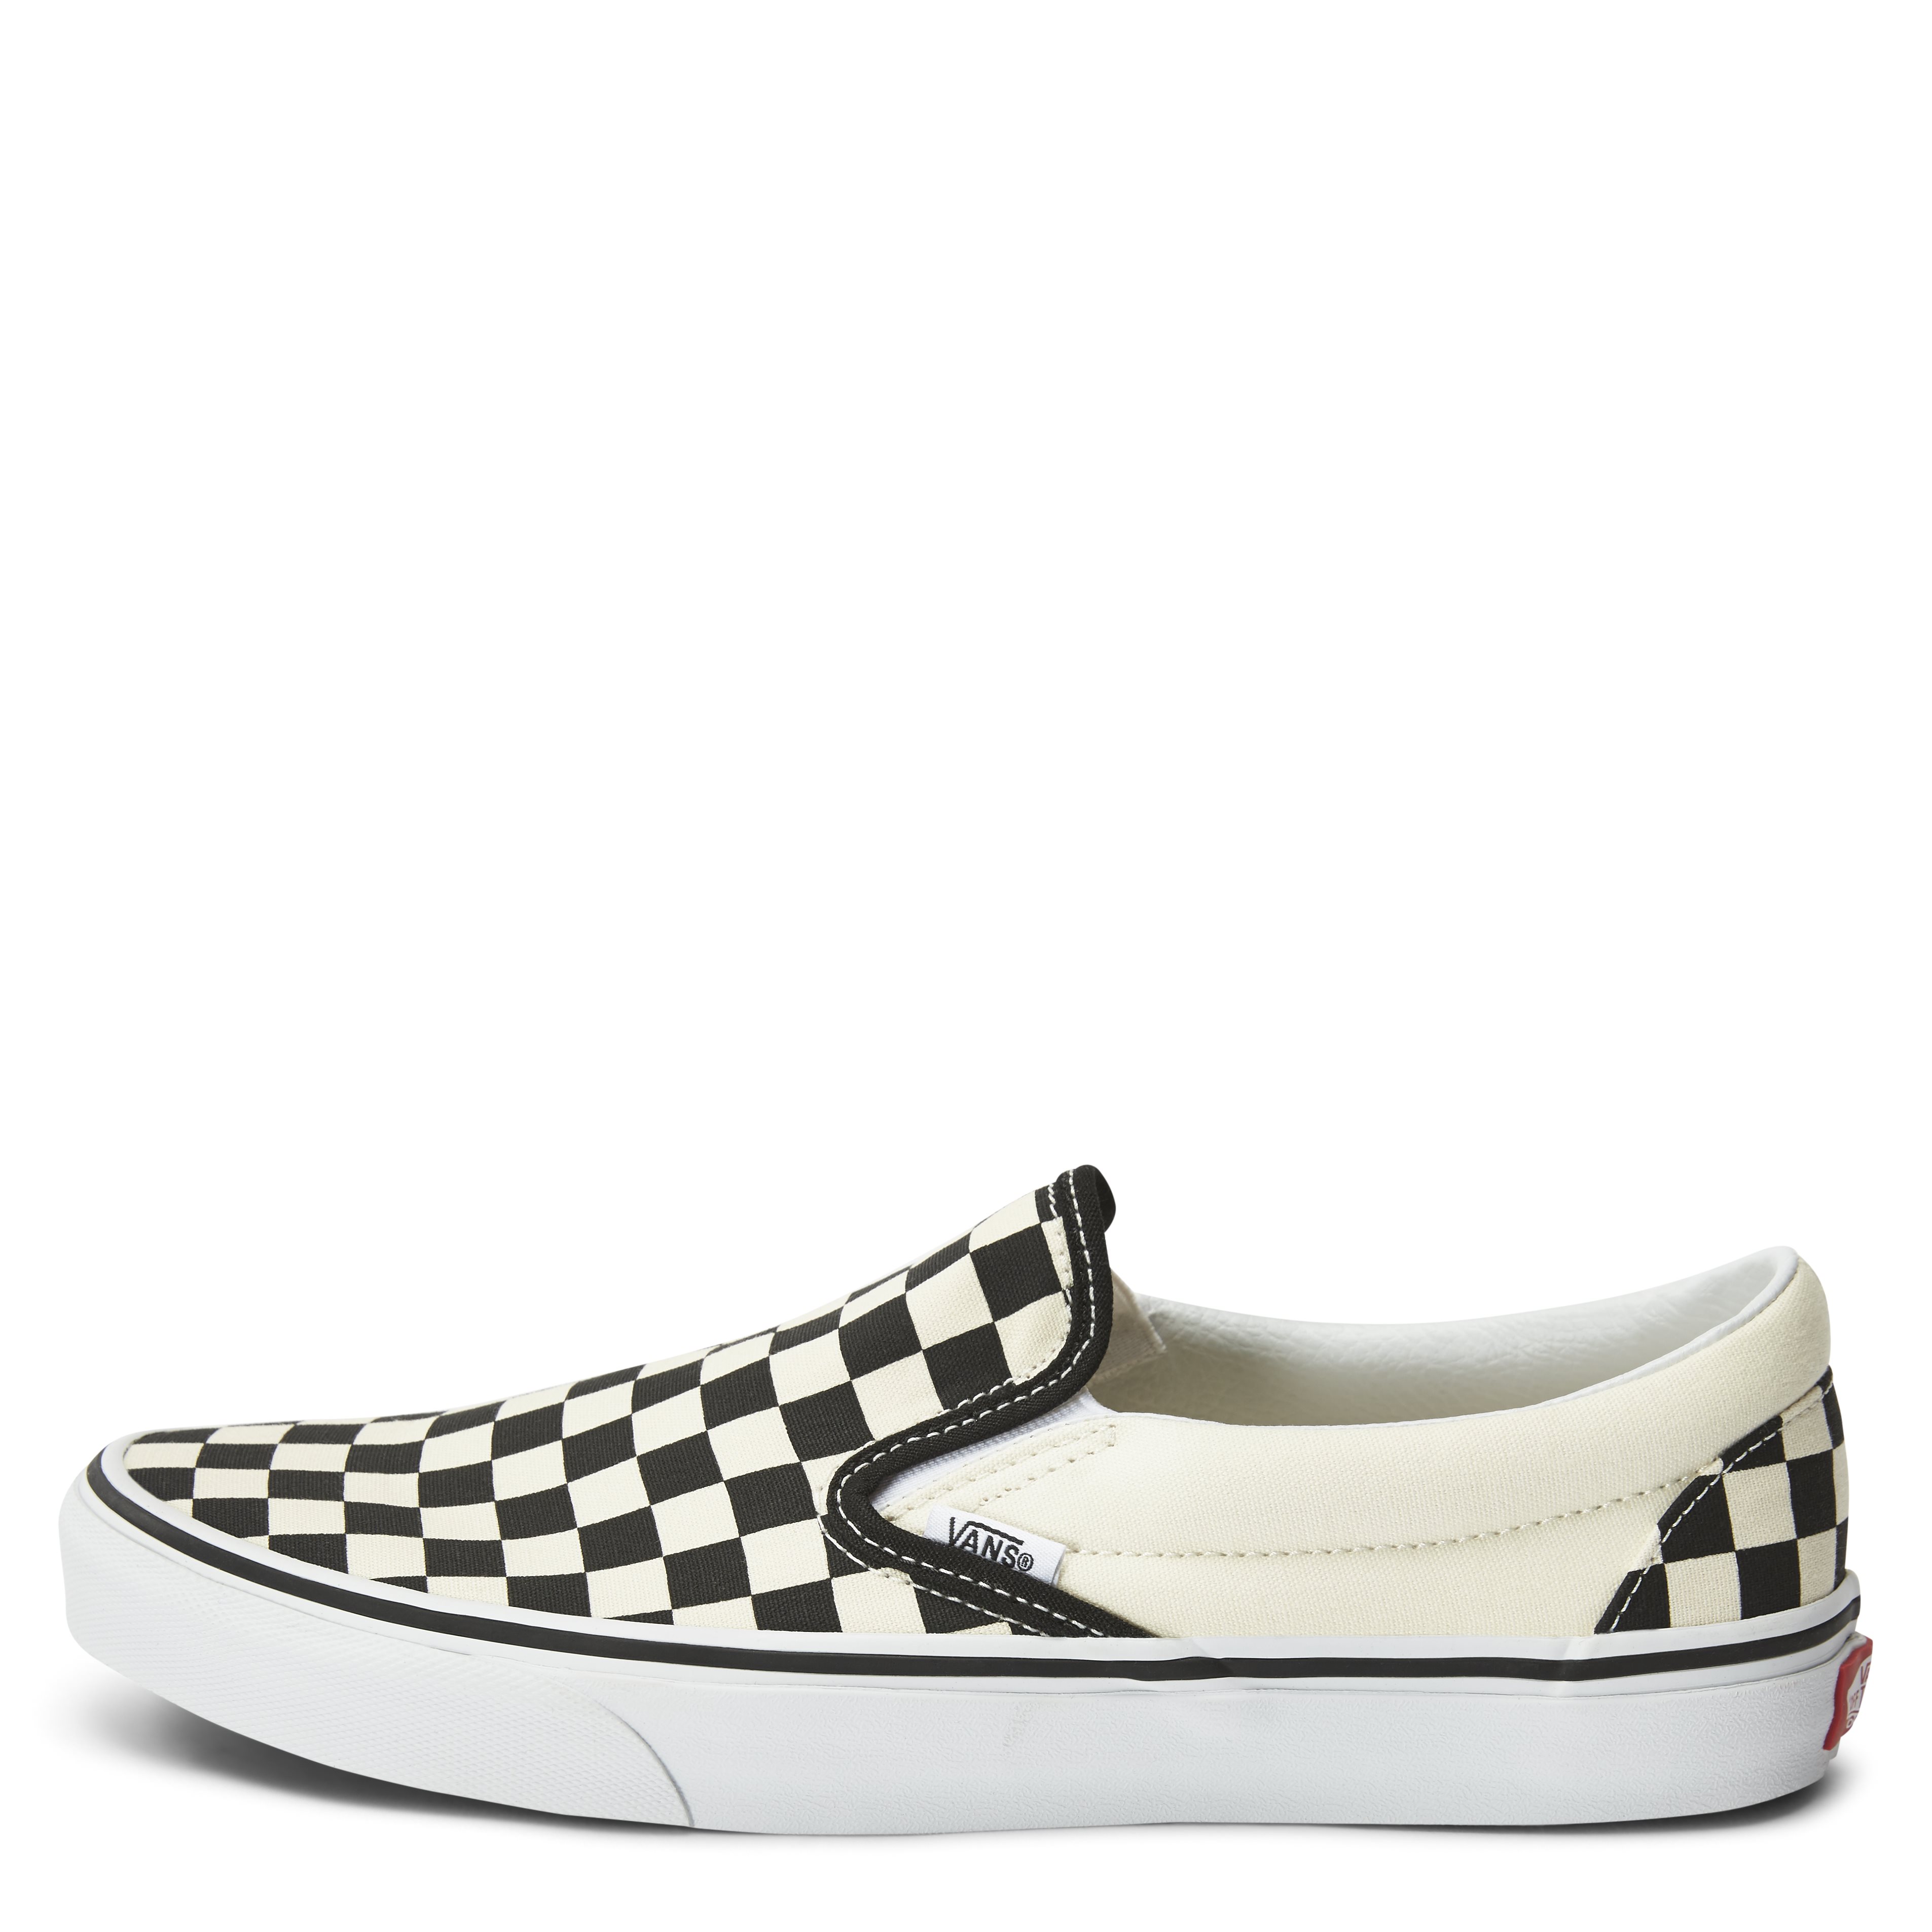 Slip On Check Shoes - Shoes - Black